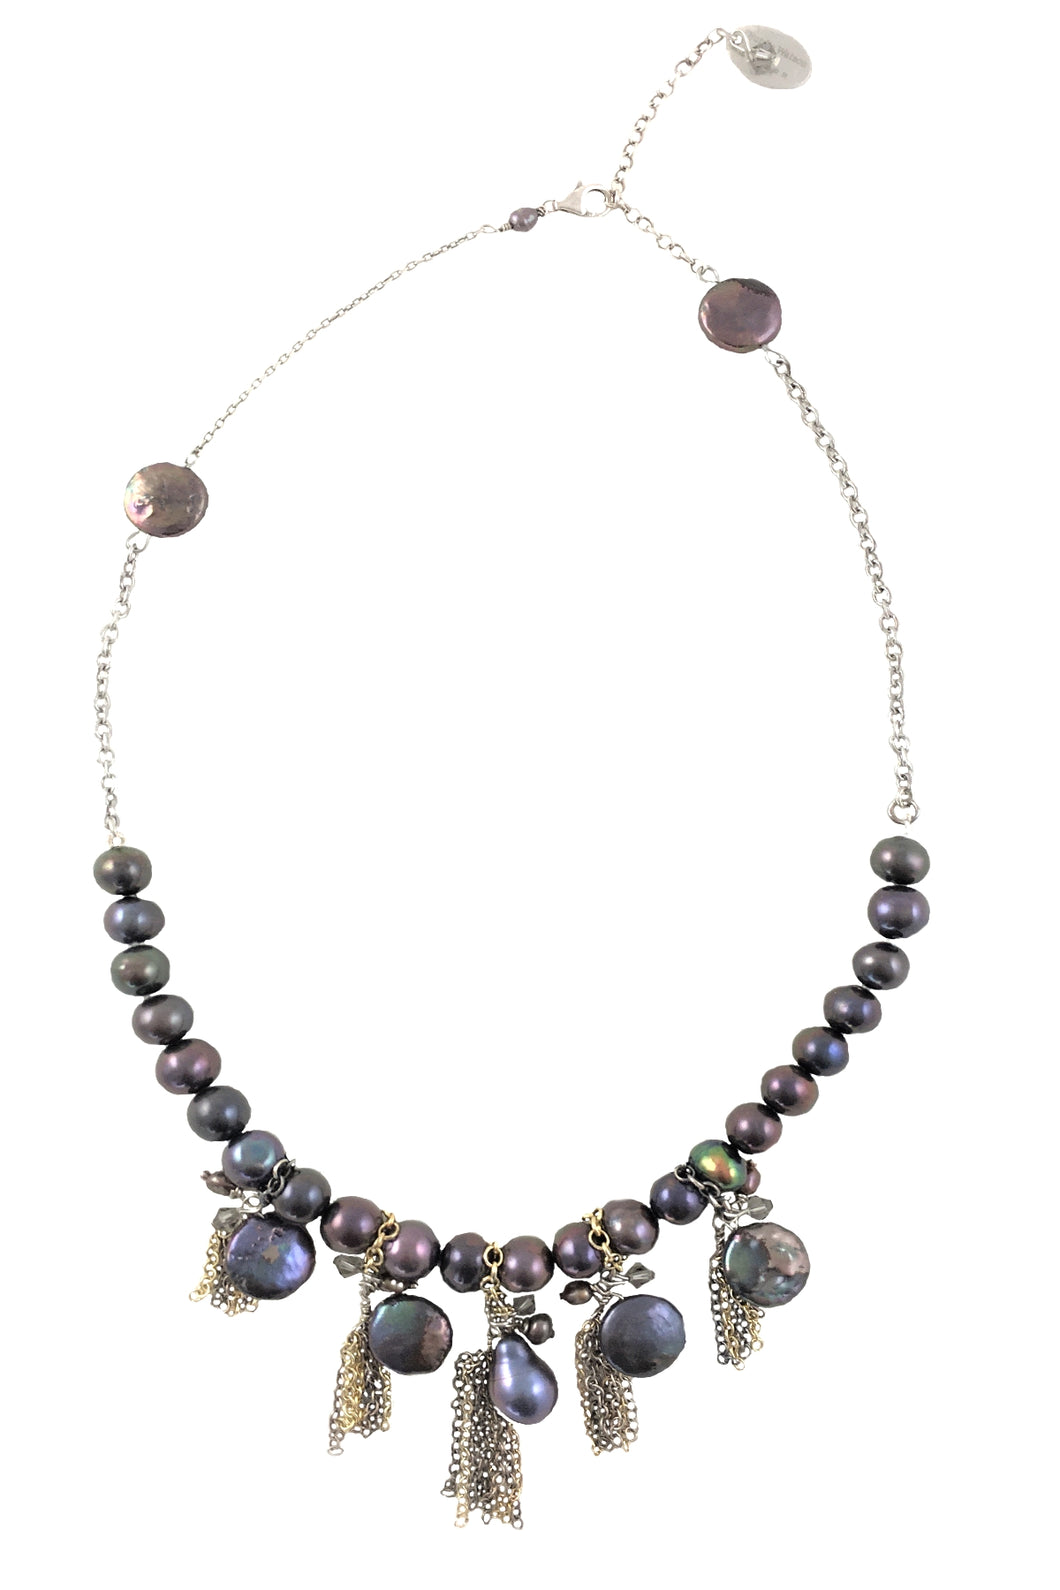 Baroque Freshwater Pearls and Swarovski Crystals Barcelona Necklace